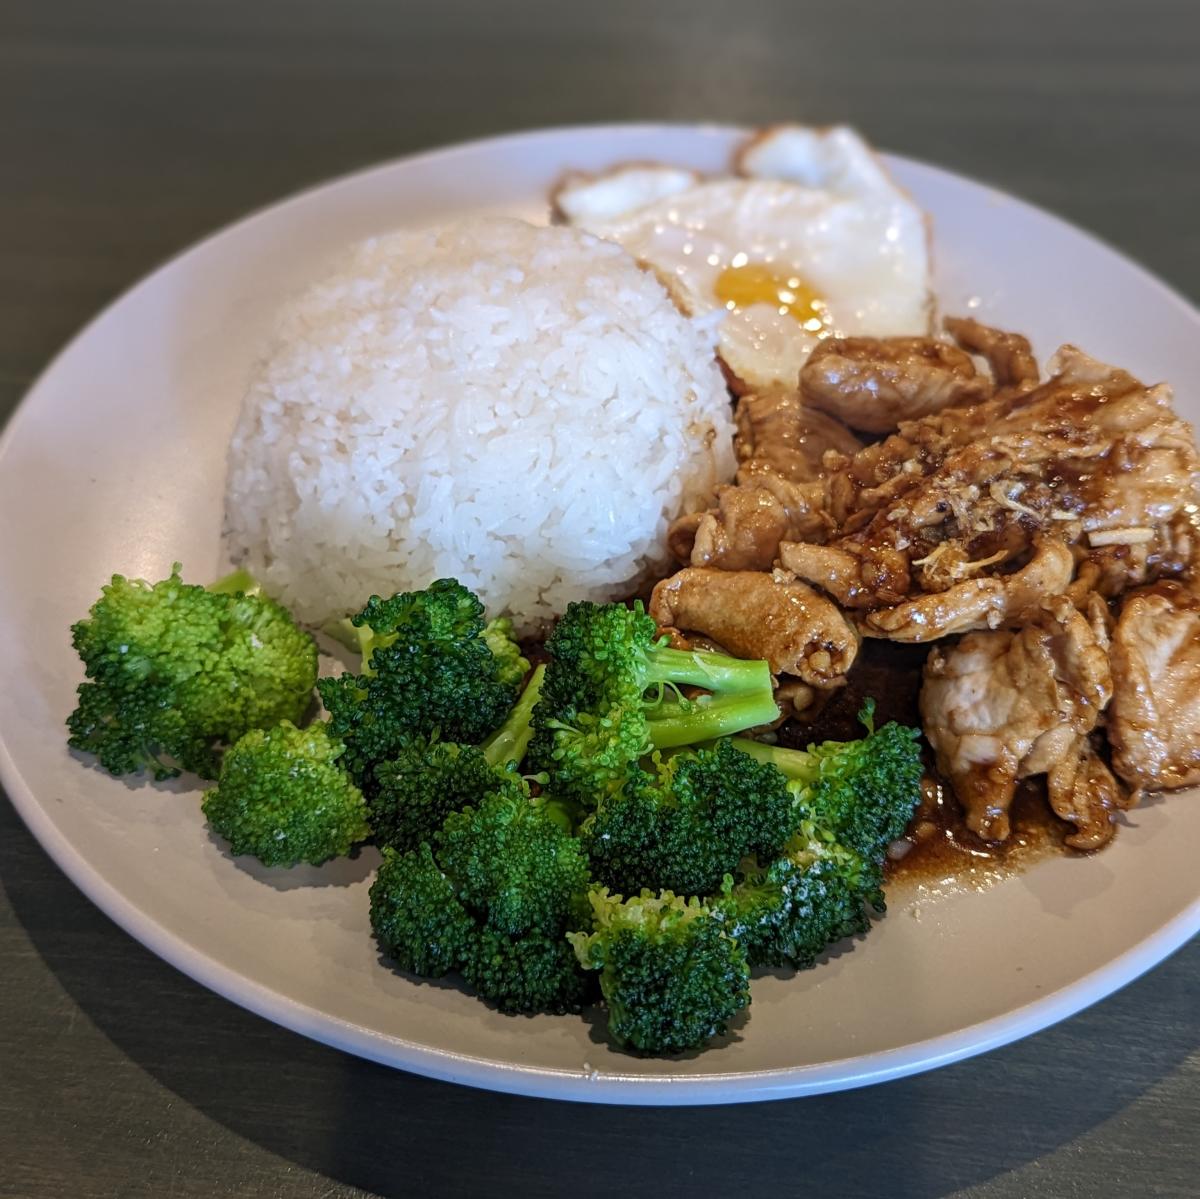 The image is of the Garden Pork at Thai Pavilion which features broccoli, rice, an egg and pork.